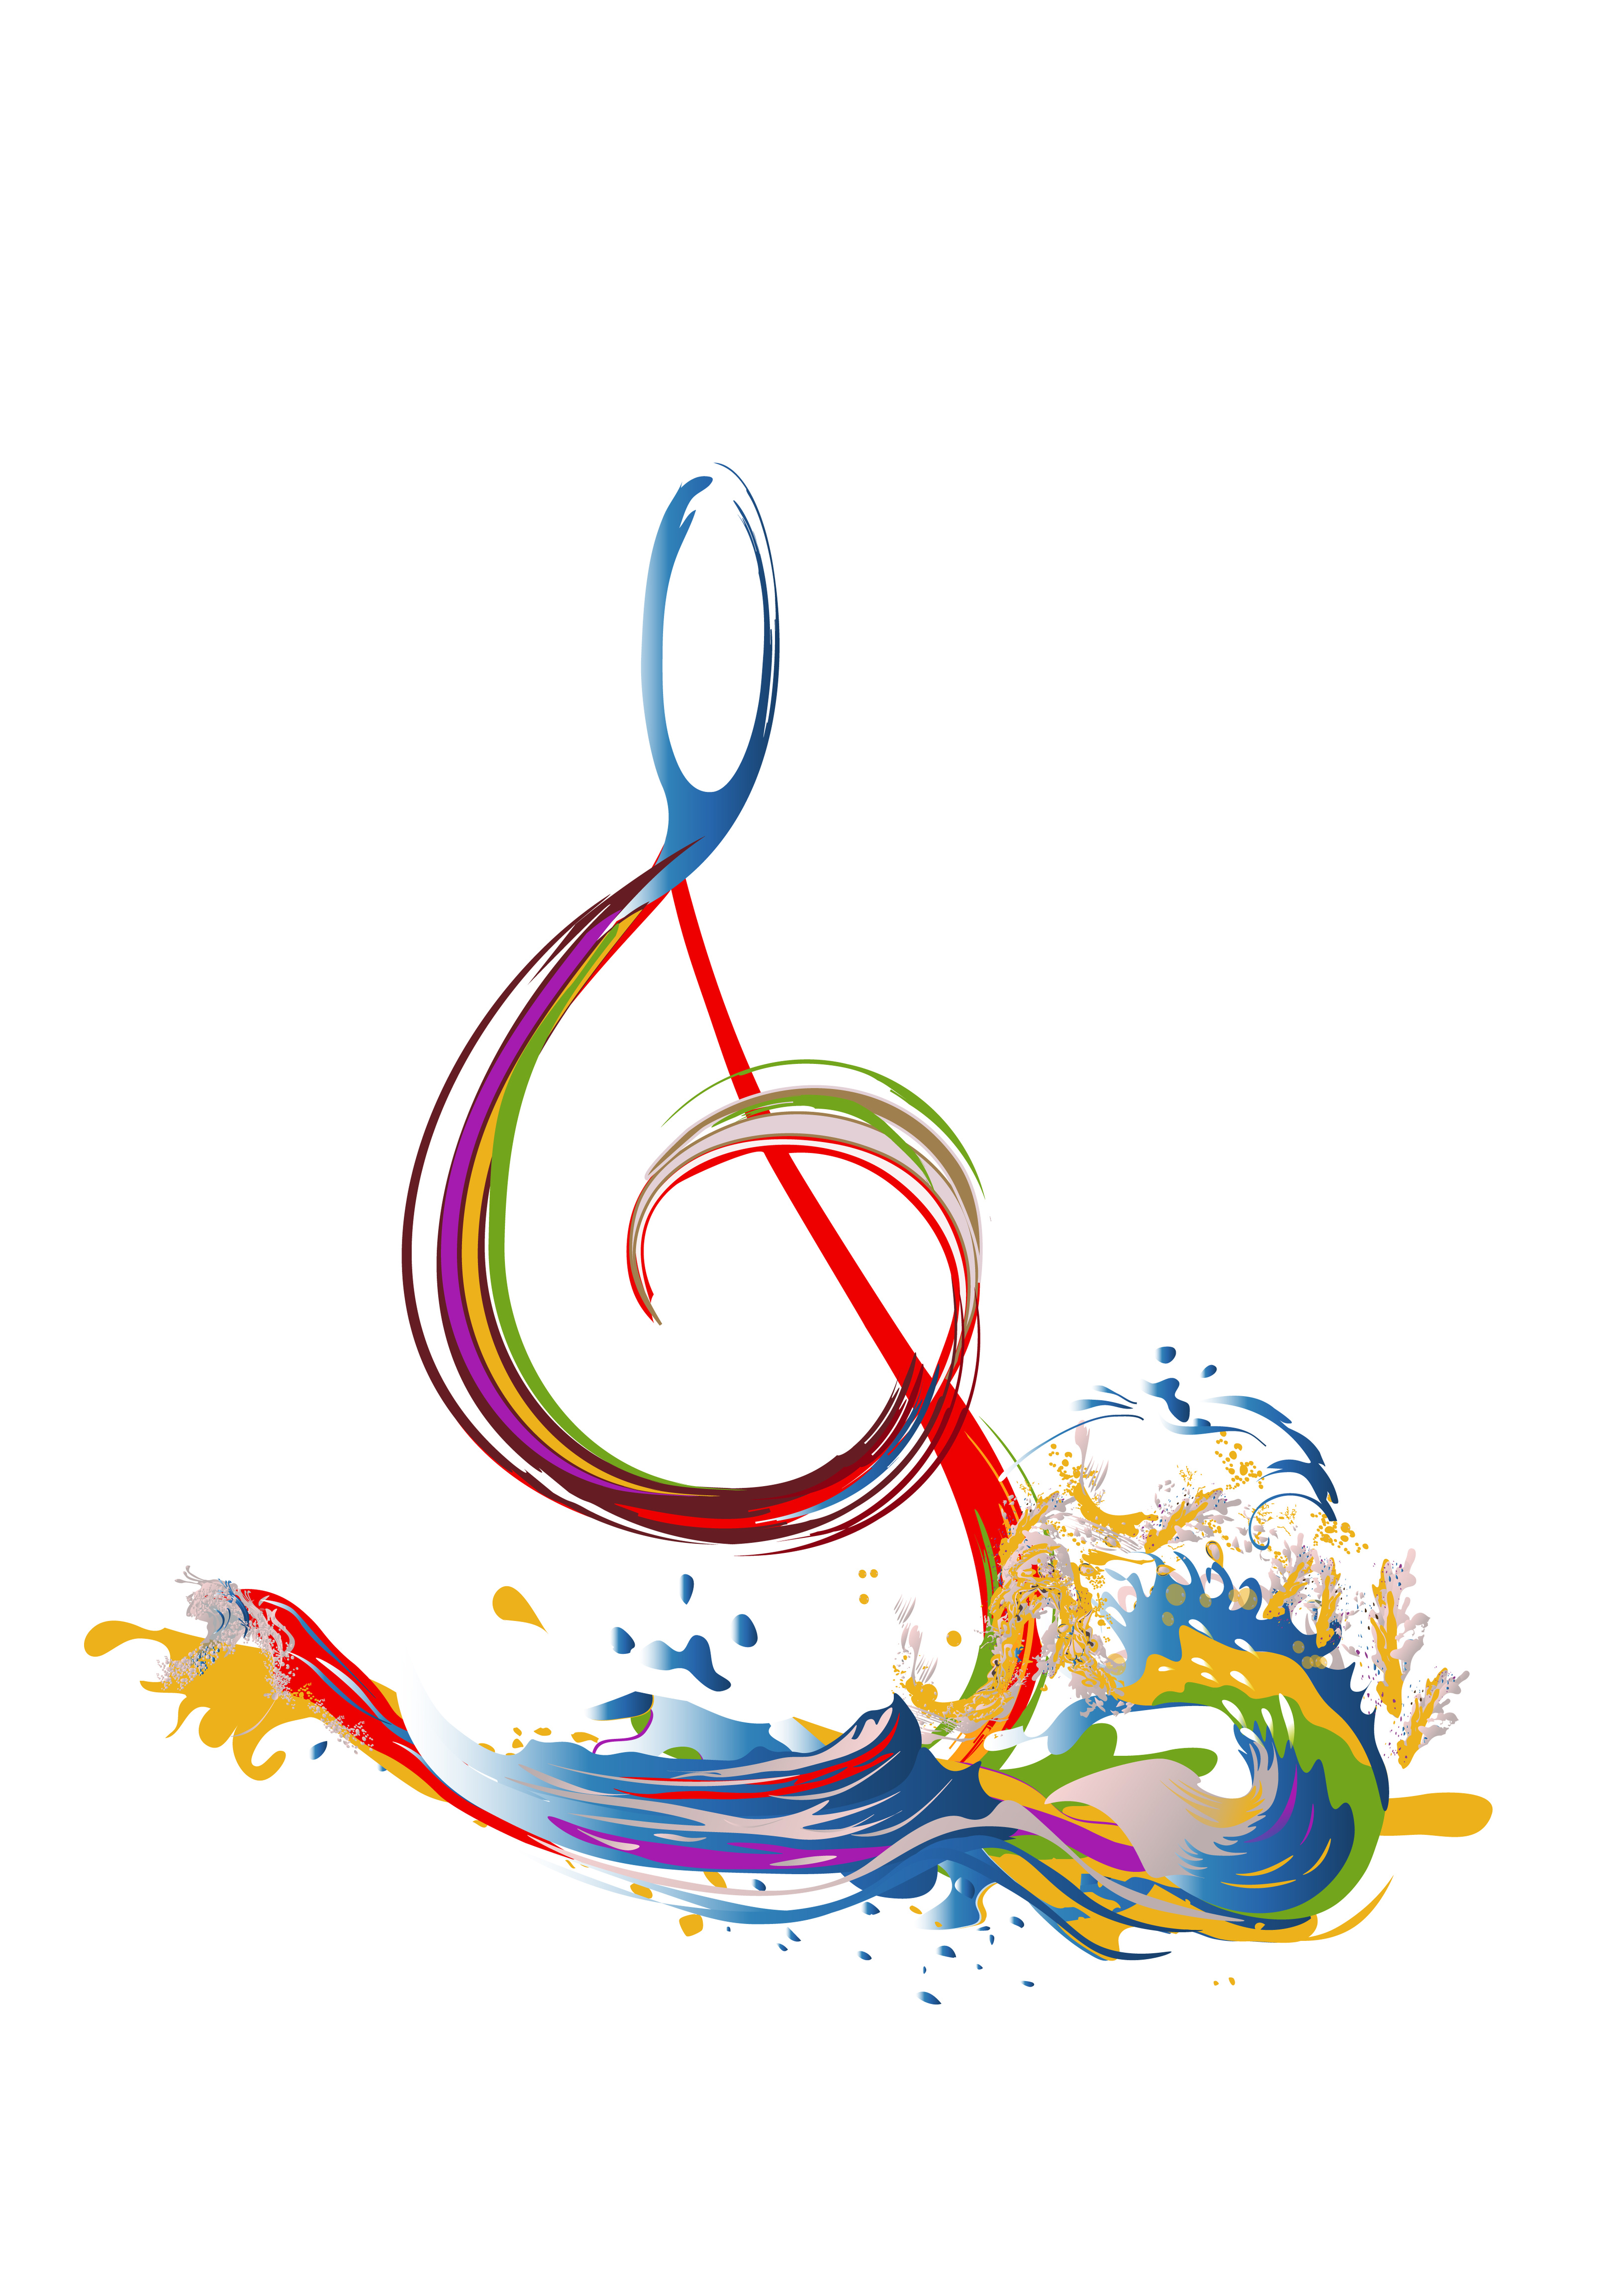 Abstract musical design with a treble clef and colorful splashes and waves. 